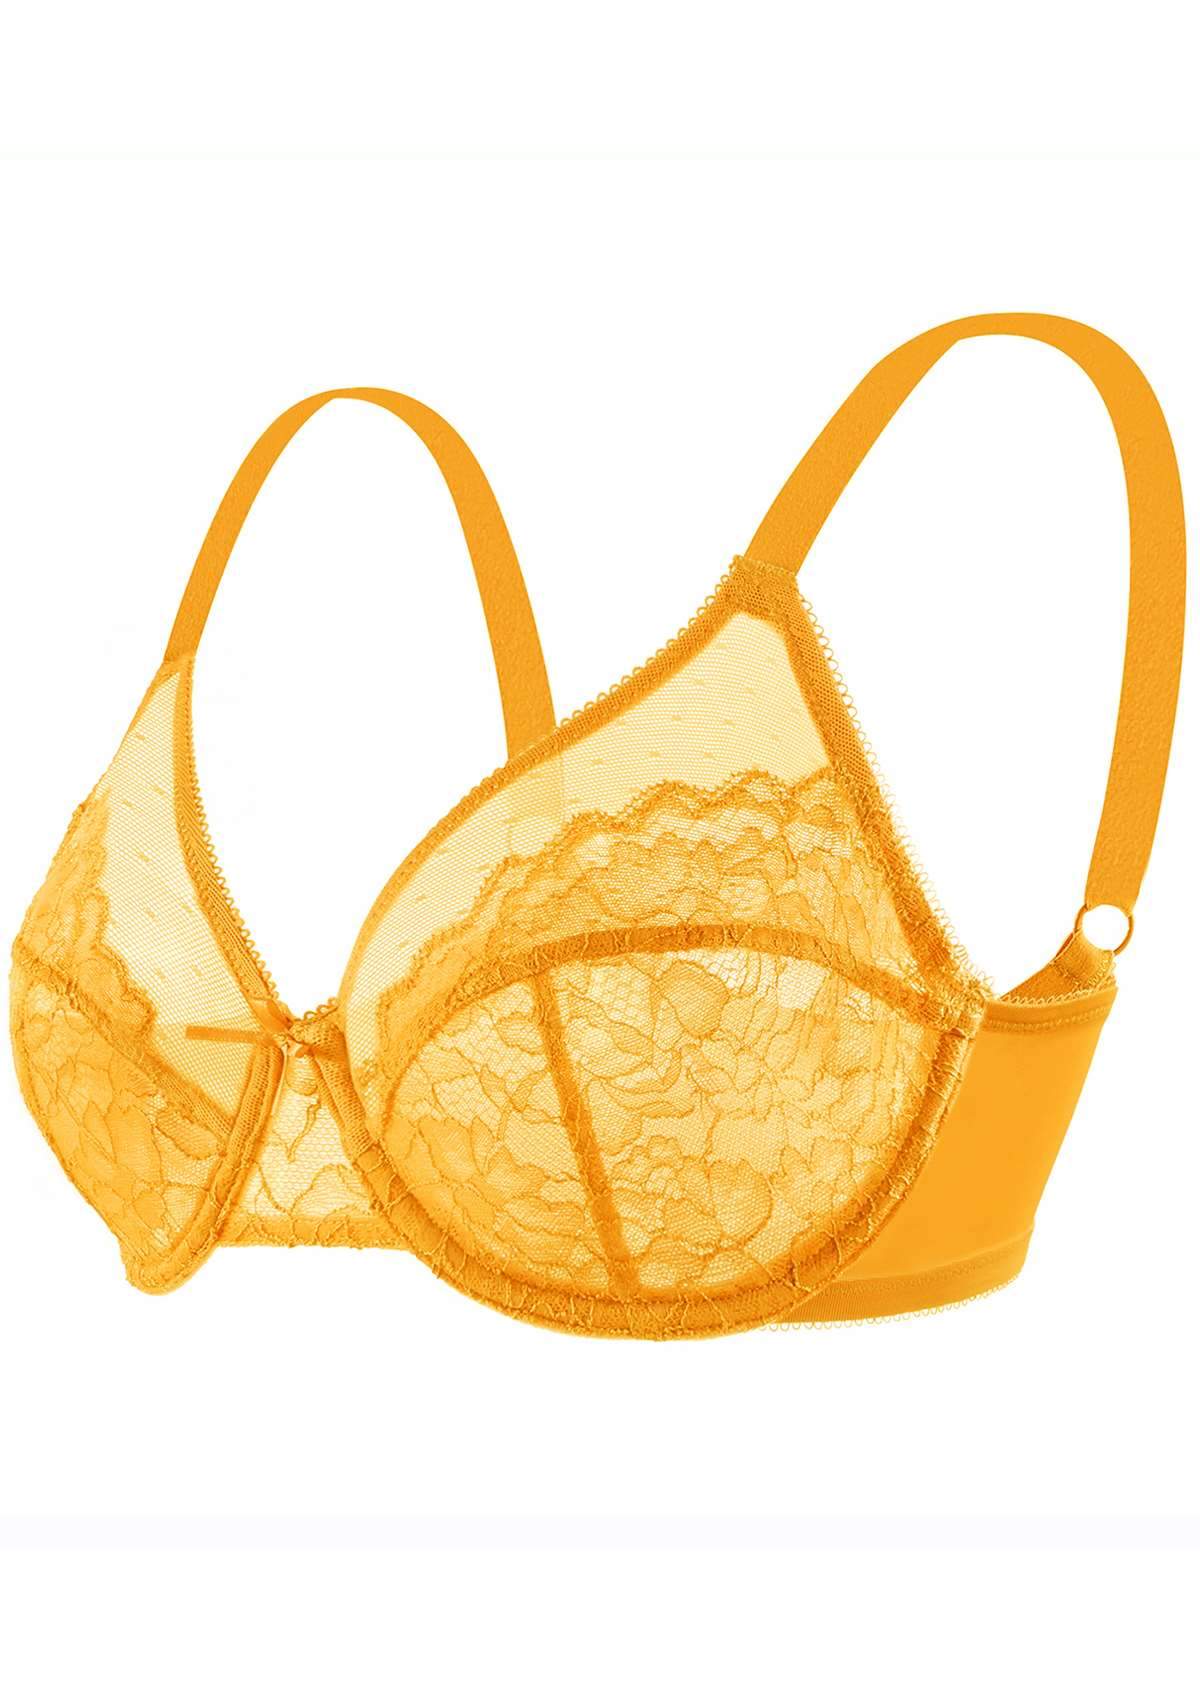 HSIA Enchante Bra And Panty Sets: Unpadded Bra With Back Support - Cadmium Yellow / 34 / DD/E